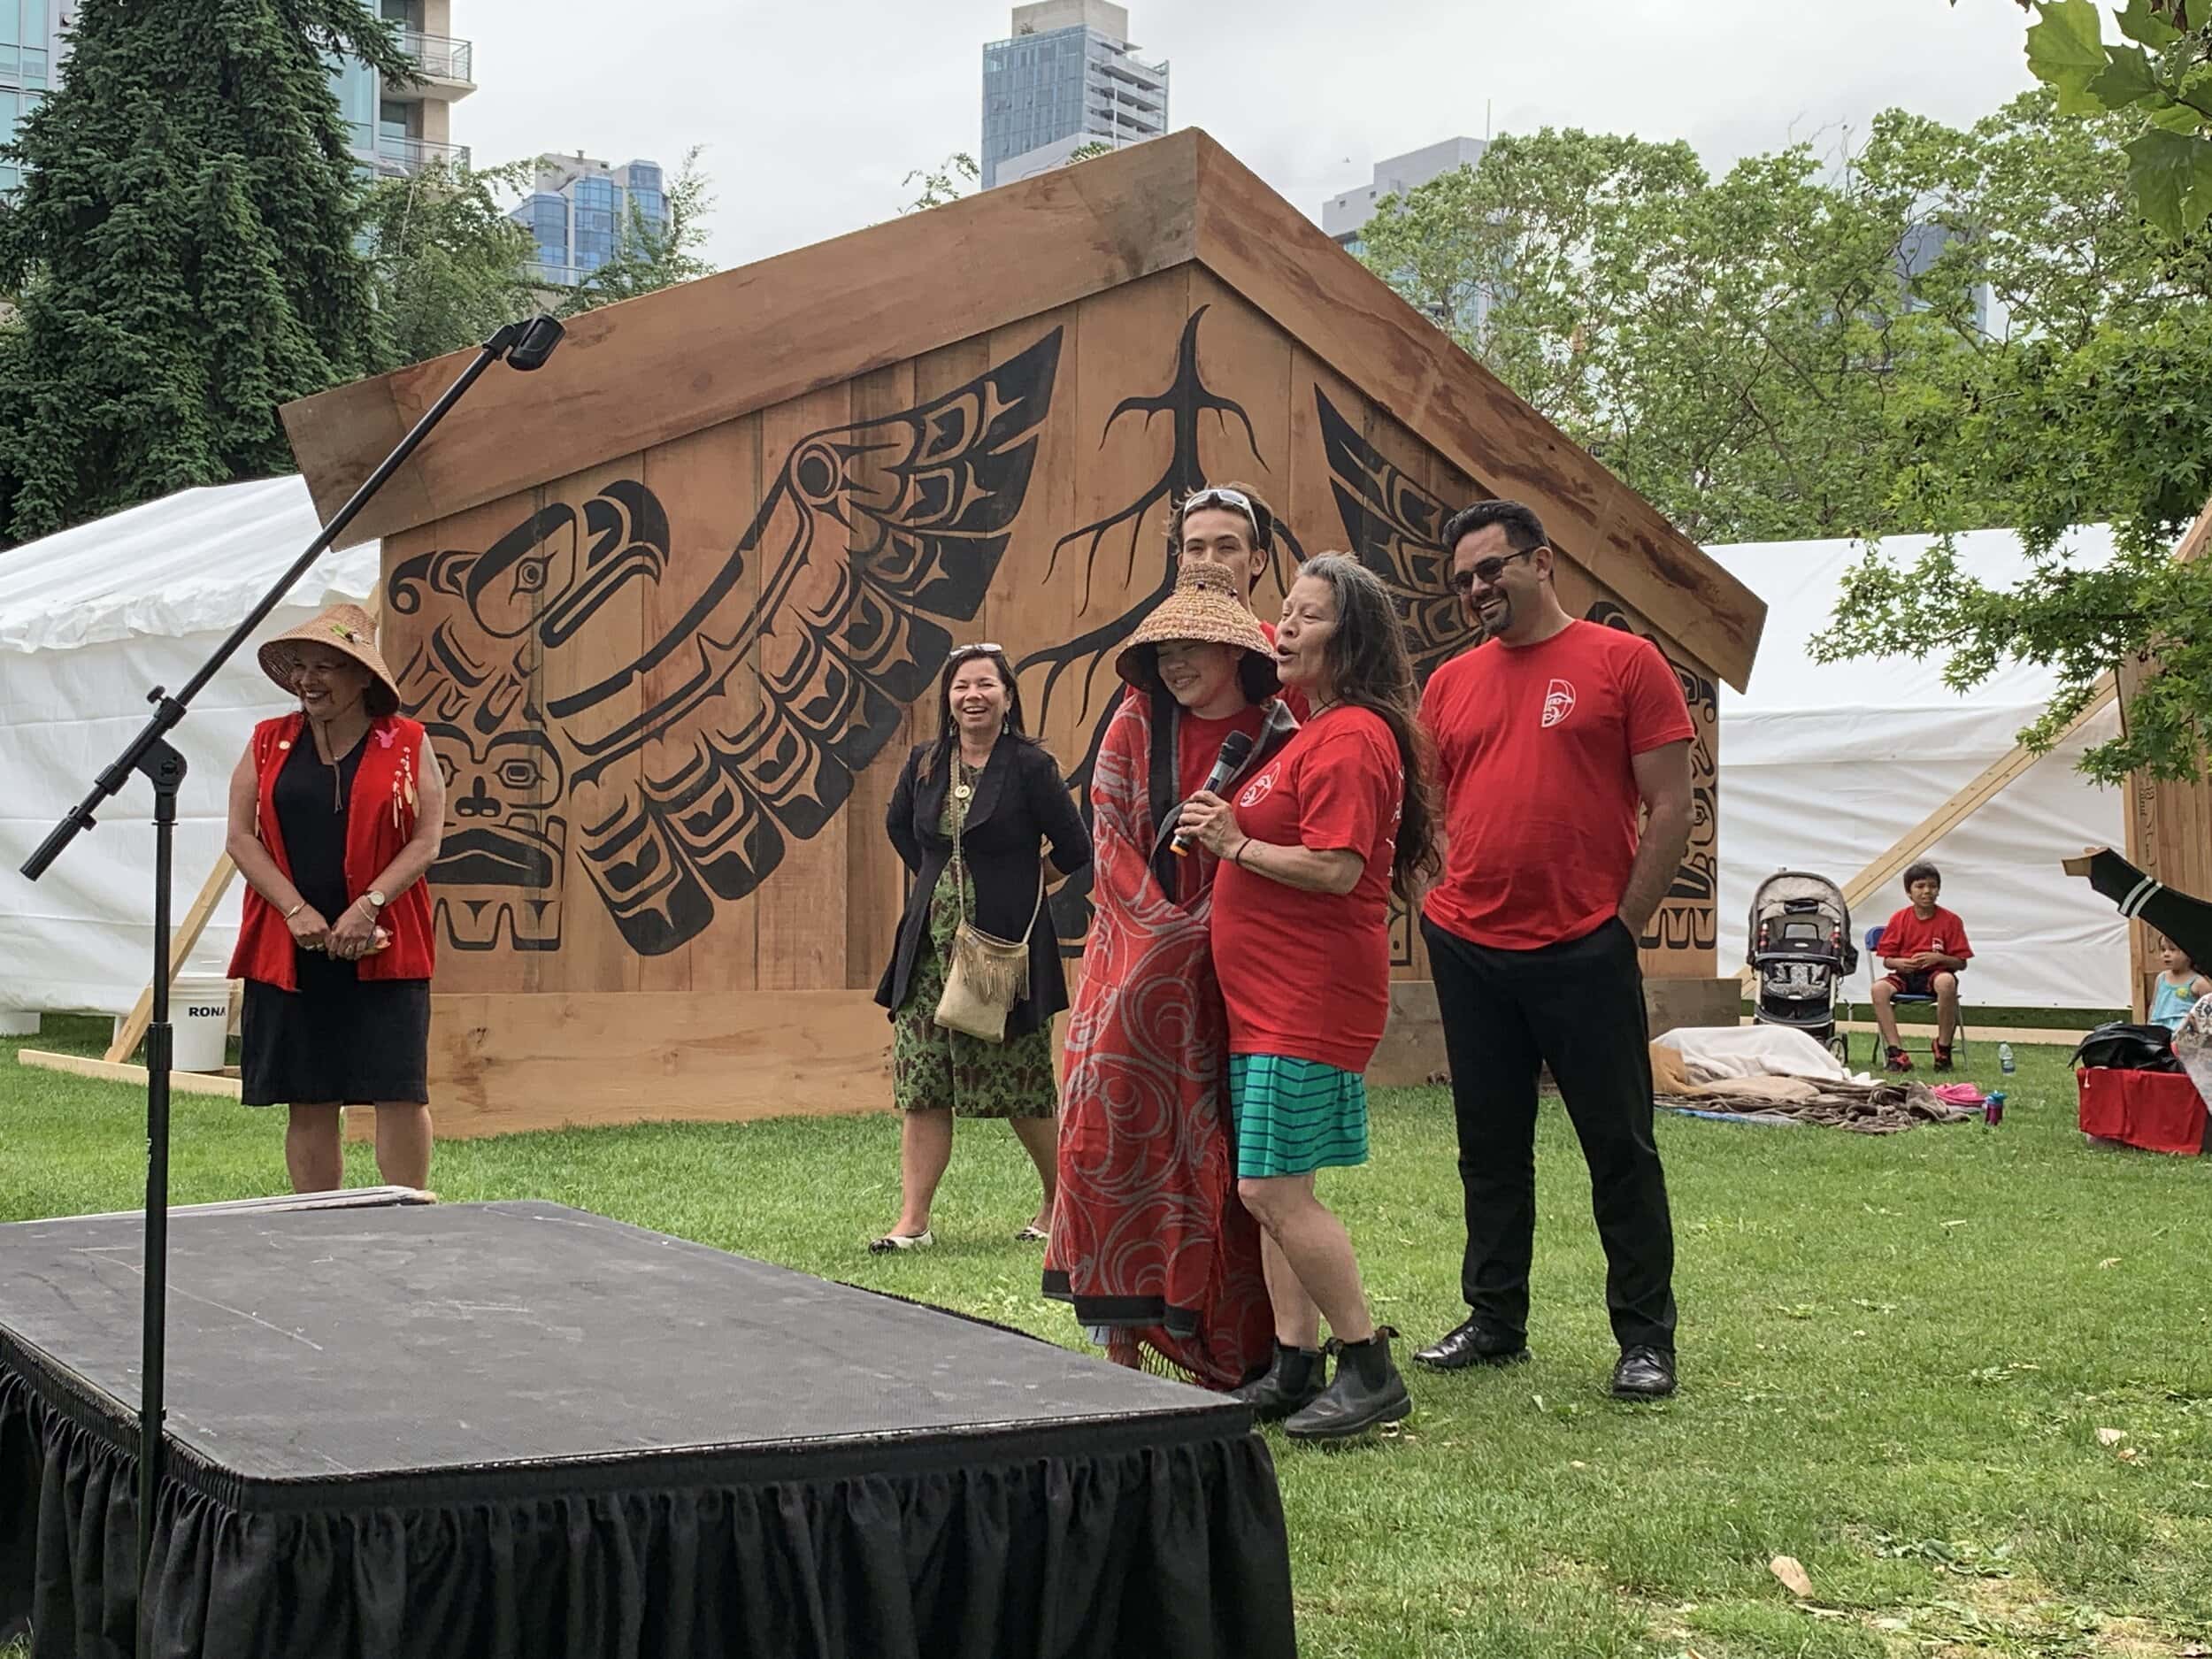 Ta’Kaiya Blaney (in centre with cedar woven hat) and Eli Enns (behind wearing sunglasses) at the Longhouse Dialogues in Vancouver BC, June 2019 for the #WomenHonourCanoe ceremony.Photo © IISAAK OLAM Foundation